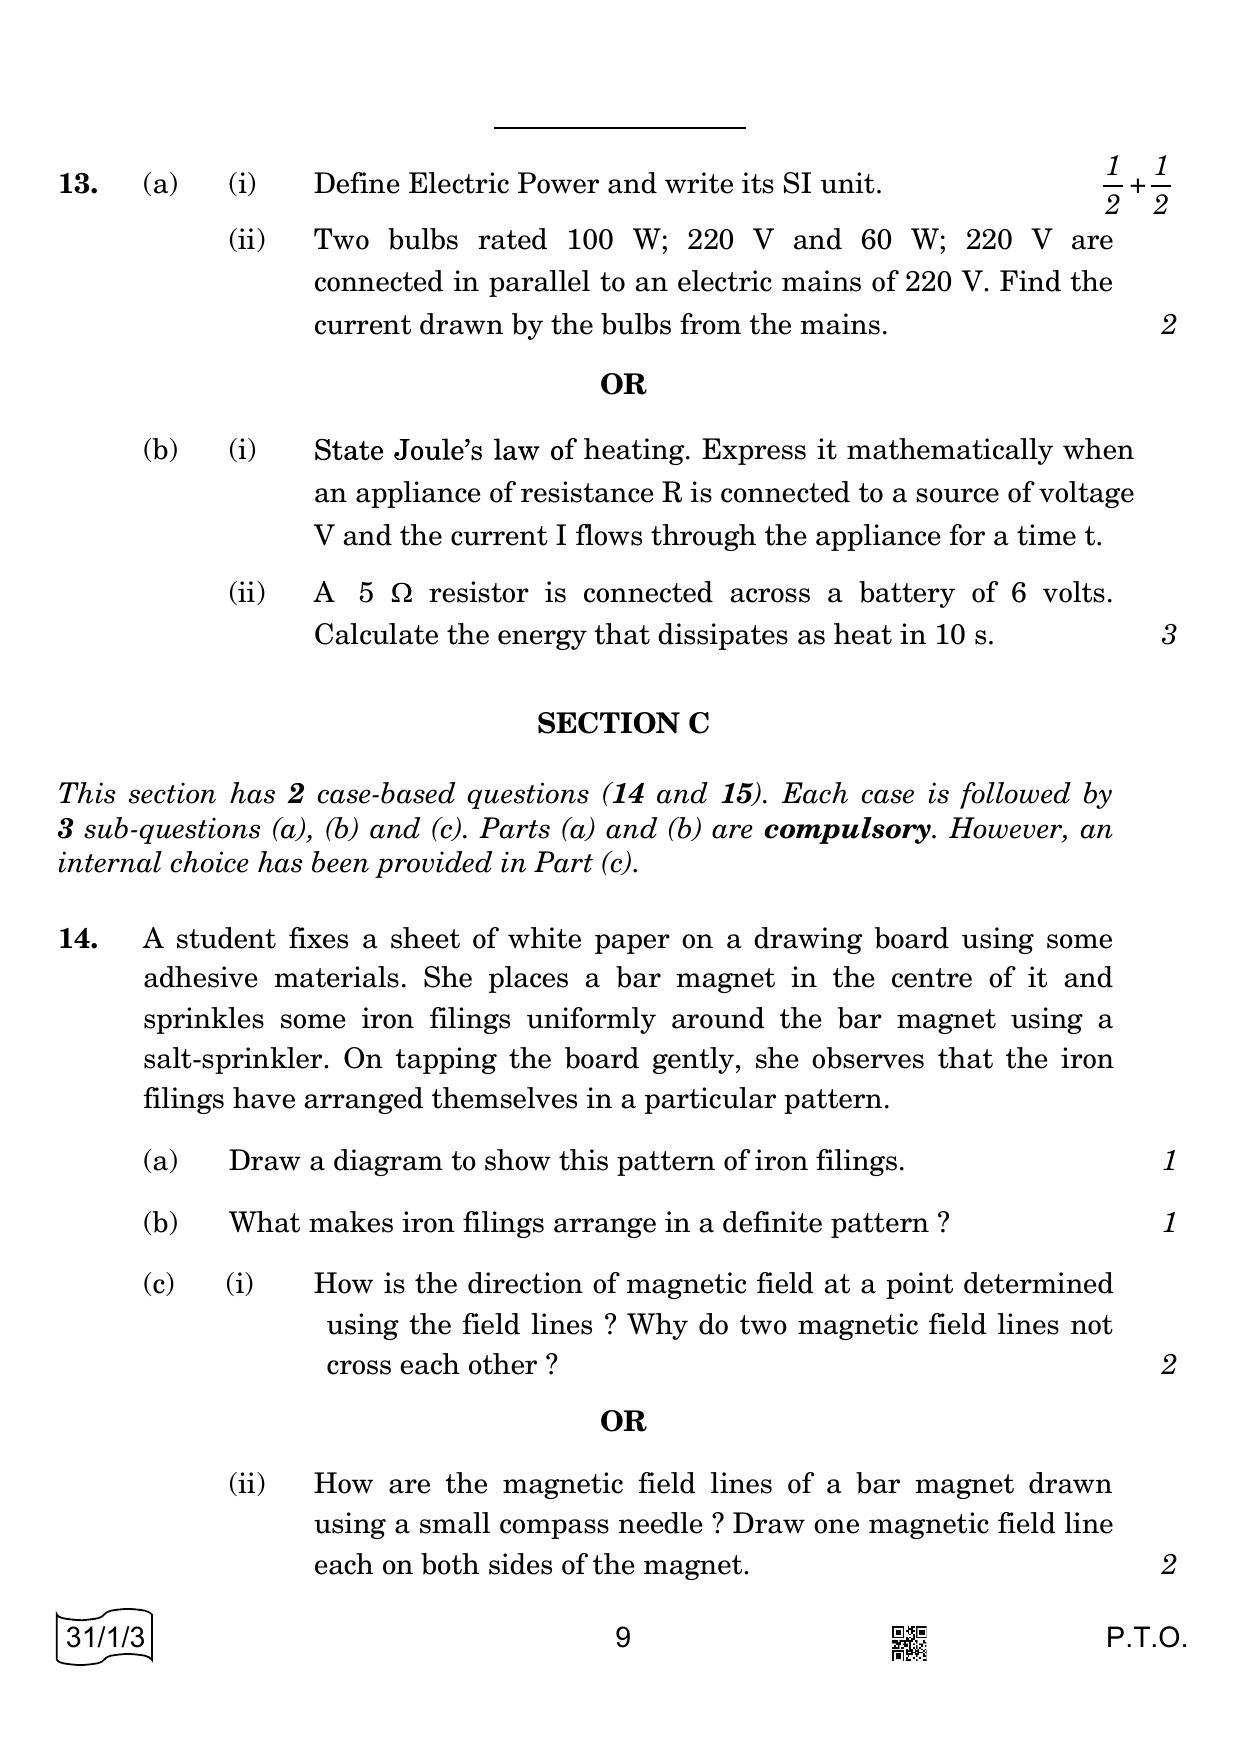 CBSE Class 10 31-1-3 Science 2022 Question Paper - Page 9